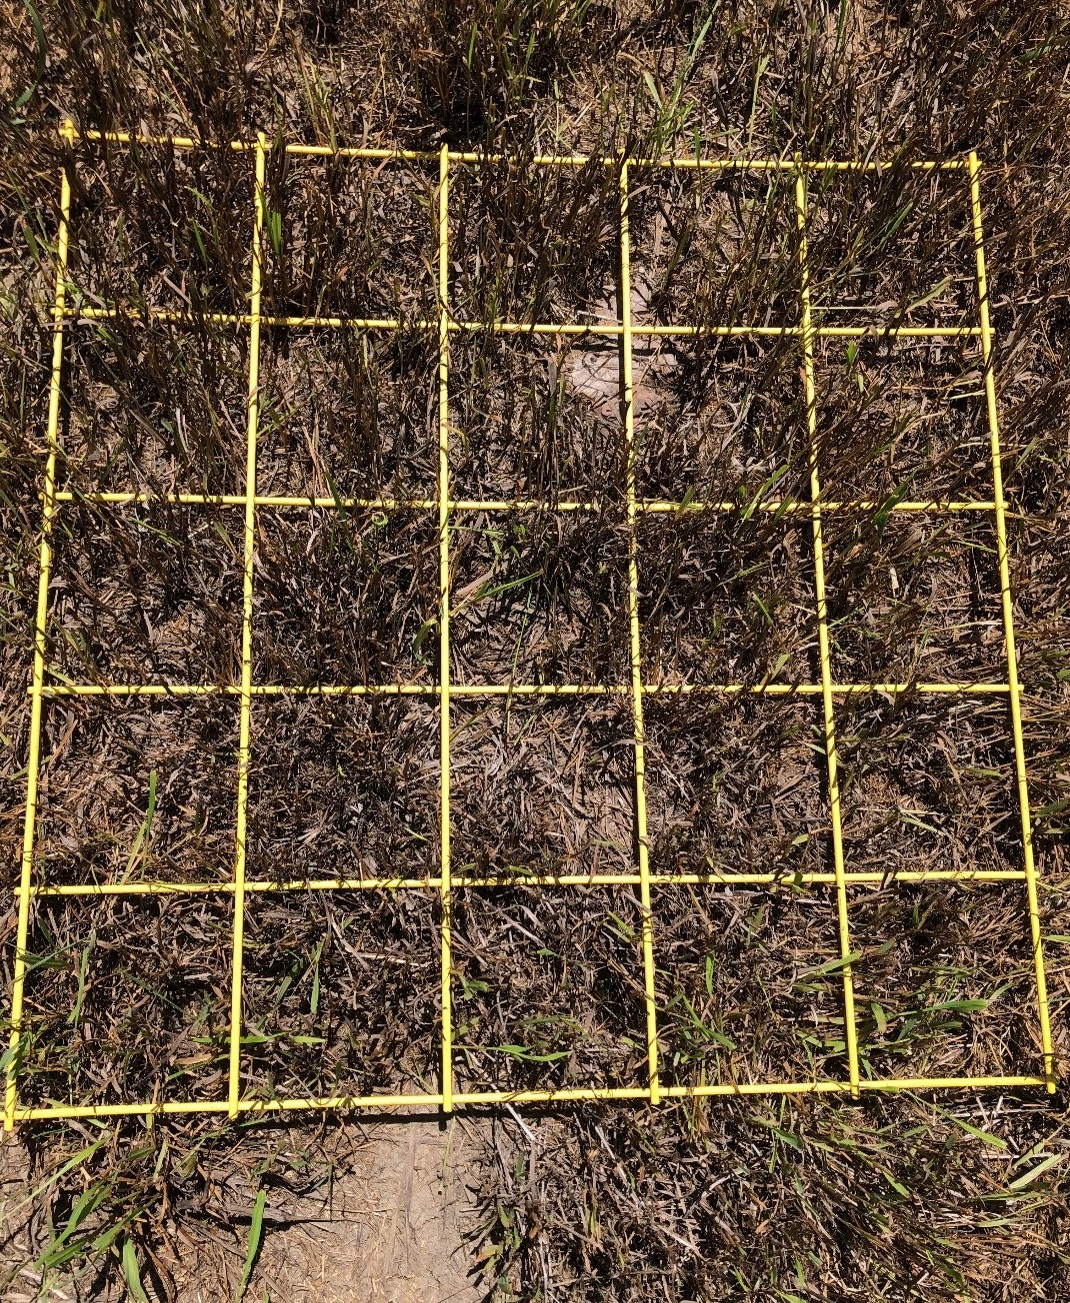 Frequency frame example showing 25/25 squares containing at least 1 green plant. 